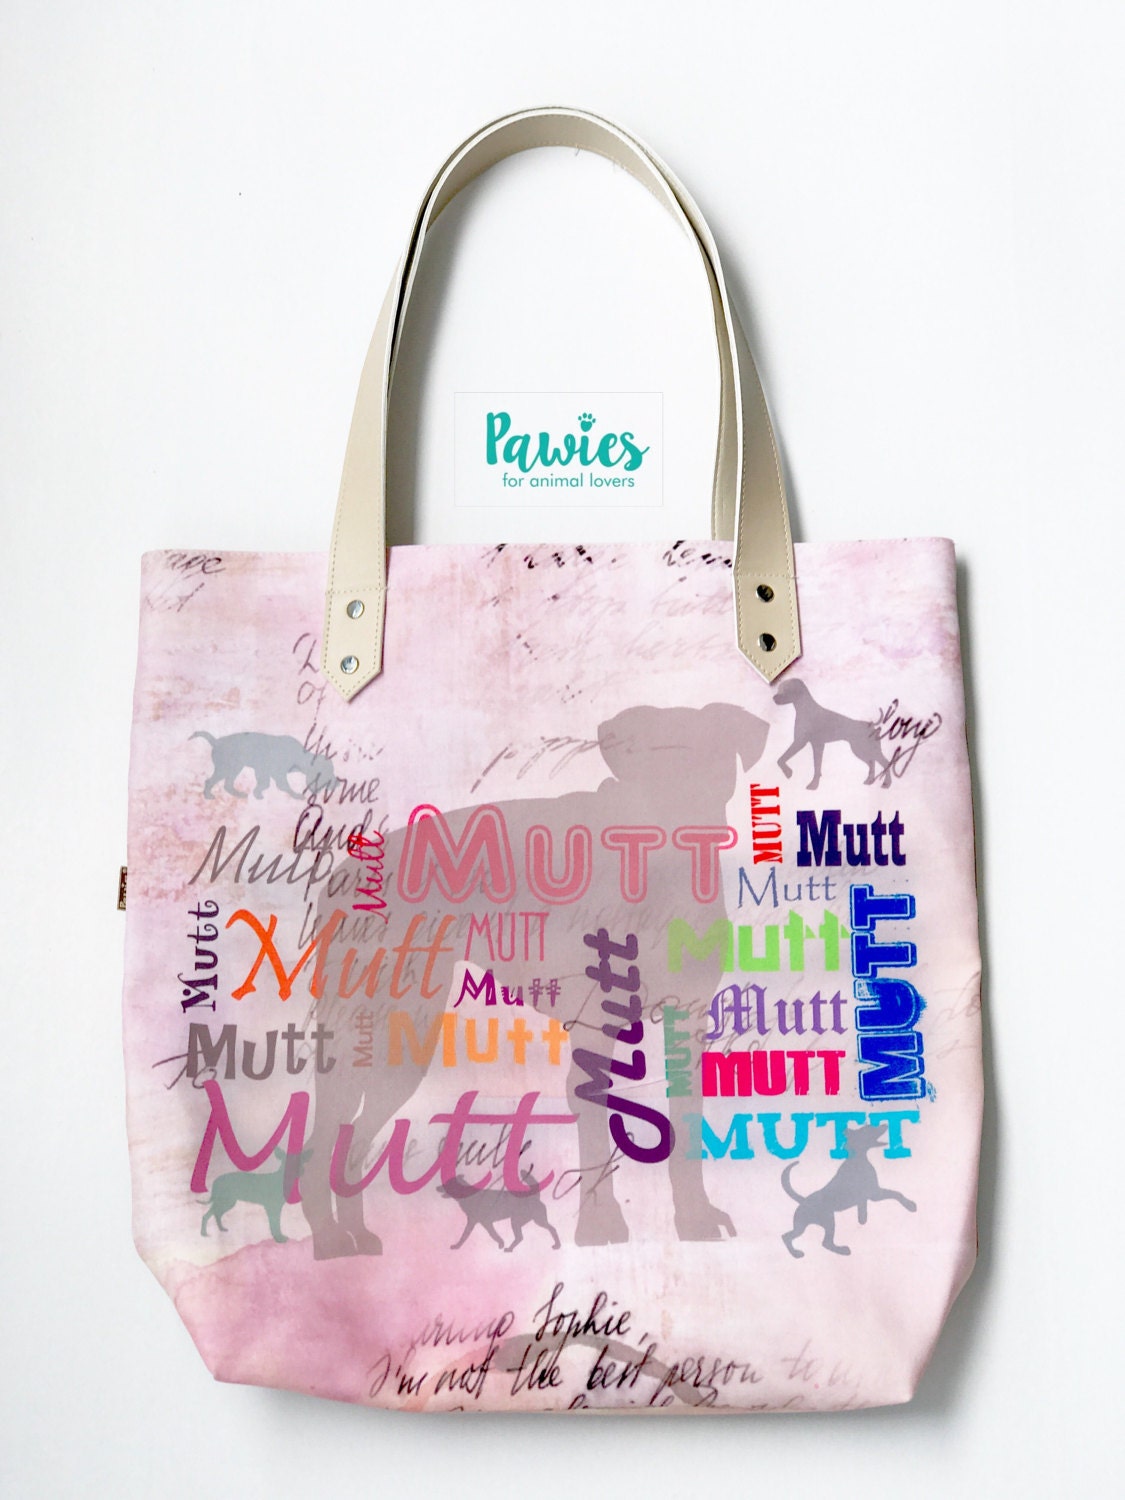 MUTT TOTE BAG !! Rescue dog, tote bag, animal lovers, dog lovers.